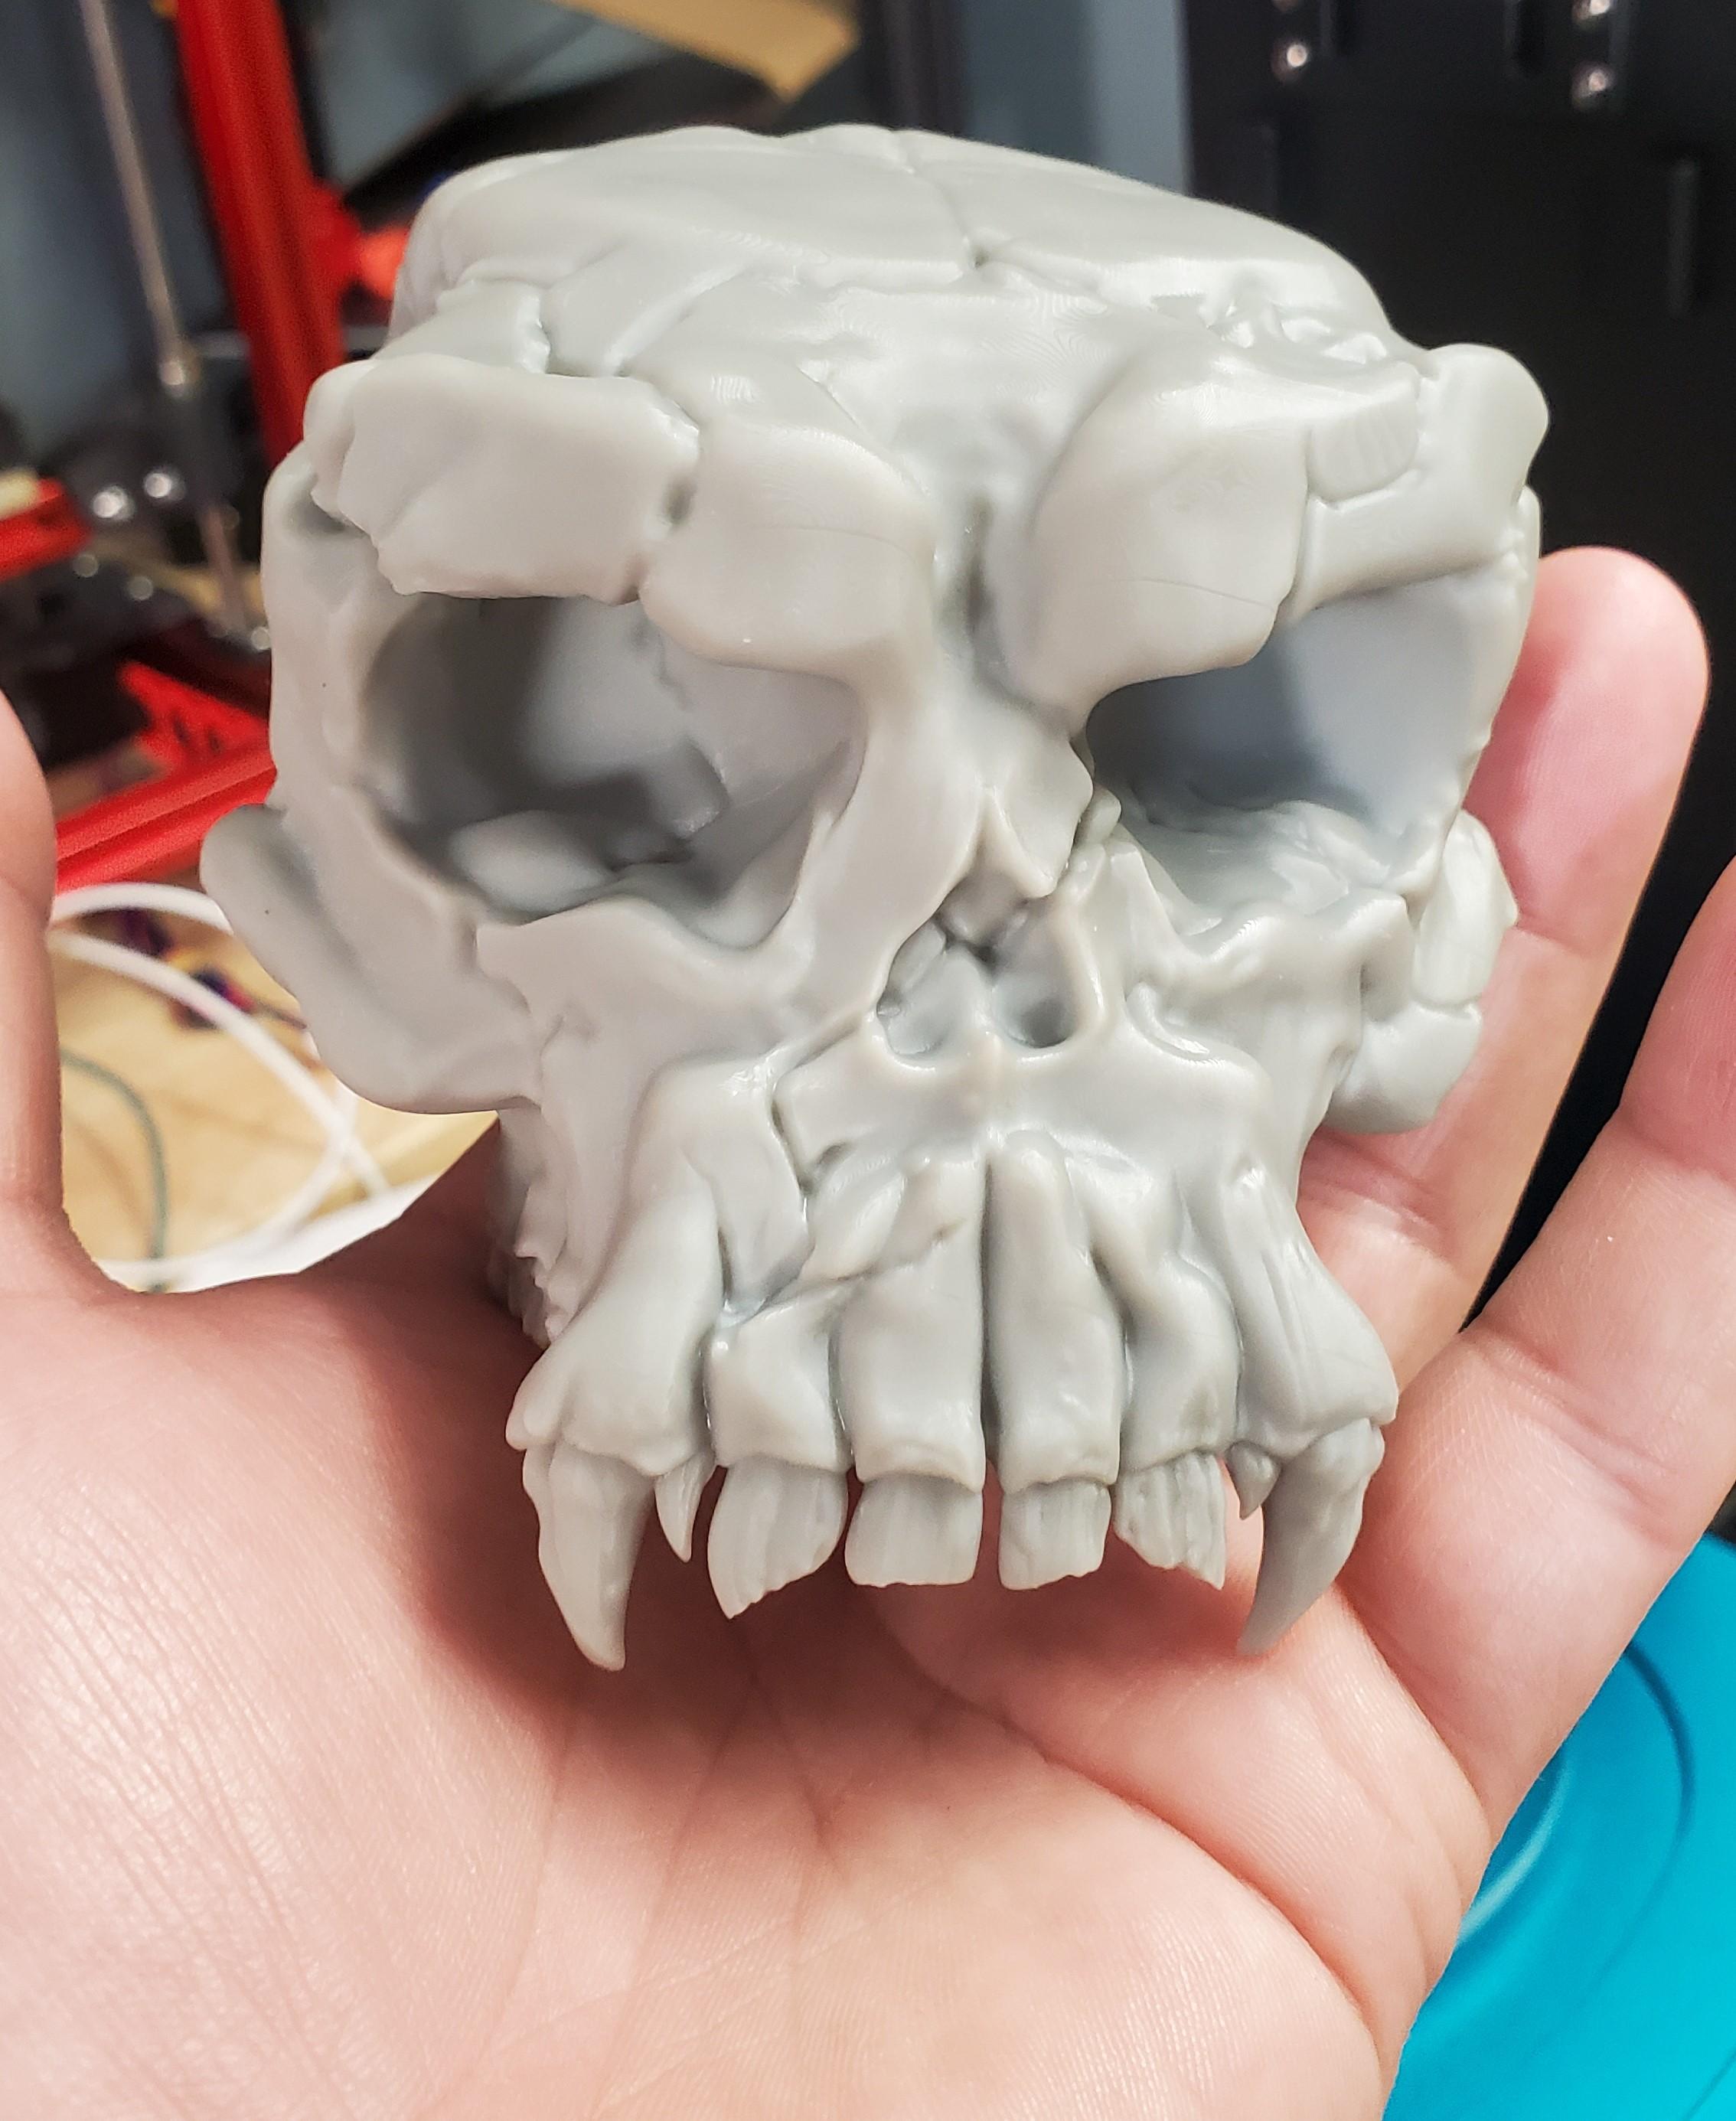 Skull of Gul'dan - Anycubic Photon Mono in siratec fast grey
Scaled to fit - 3d model